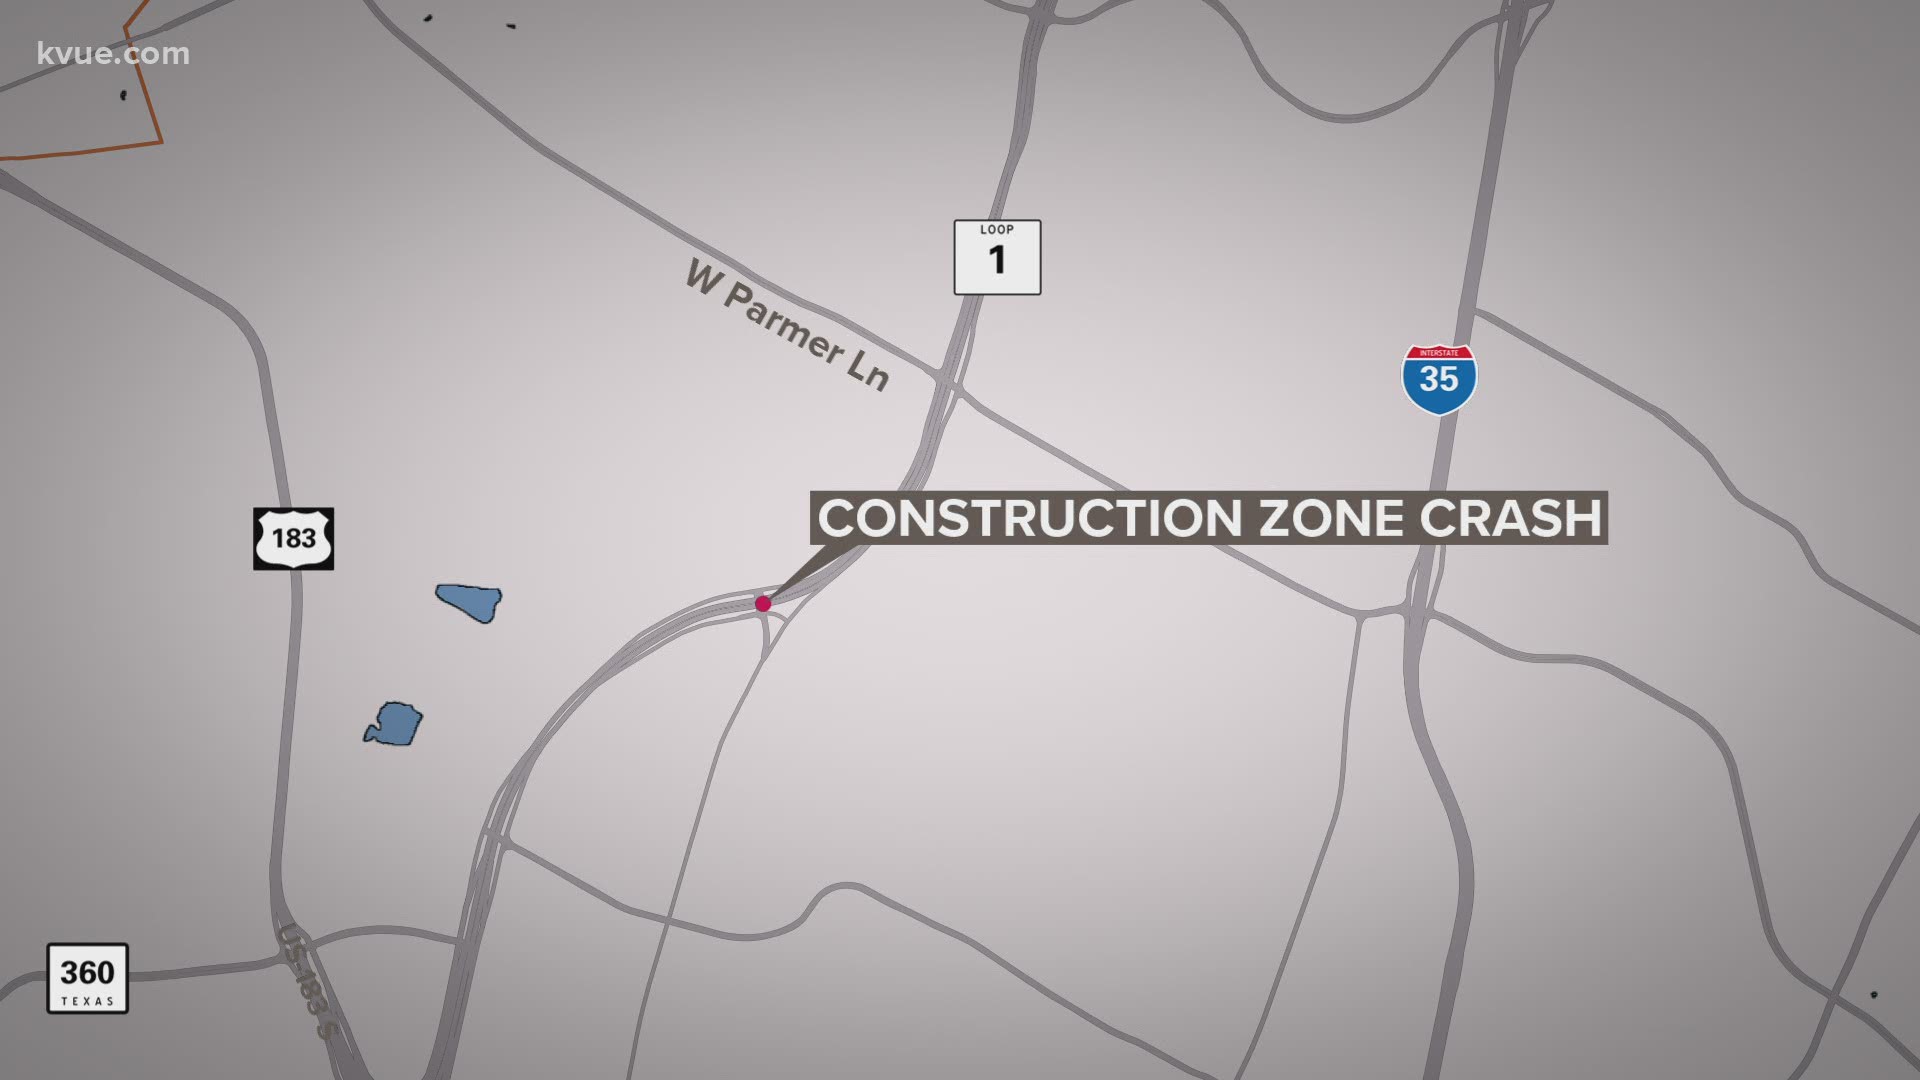 One person is dead and four are injured after a vehicle crashed into a construction zone on the Mopac Expressway.